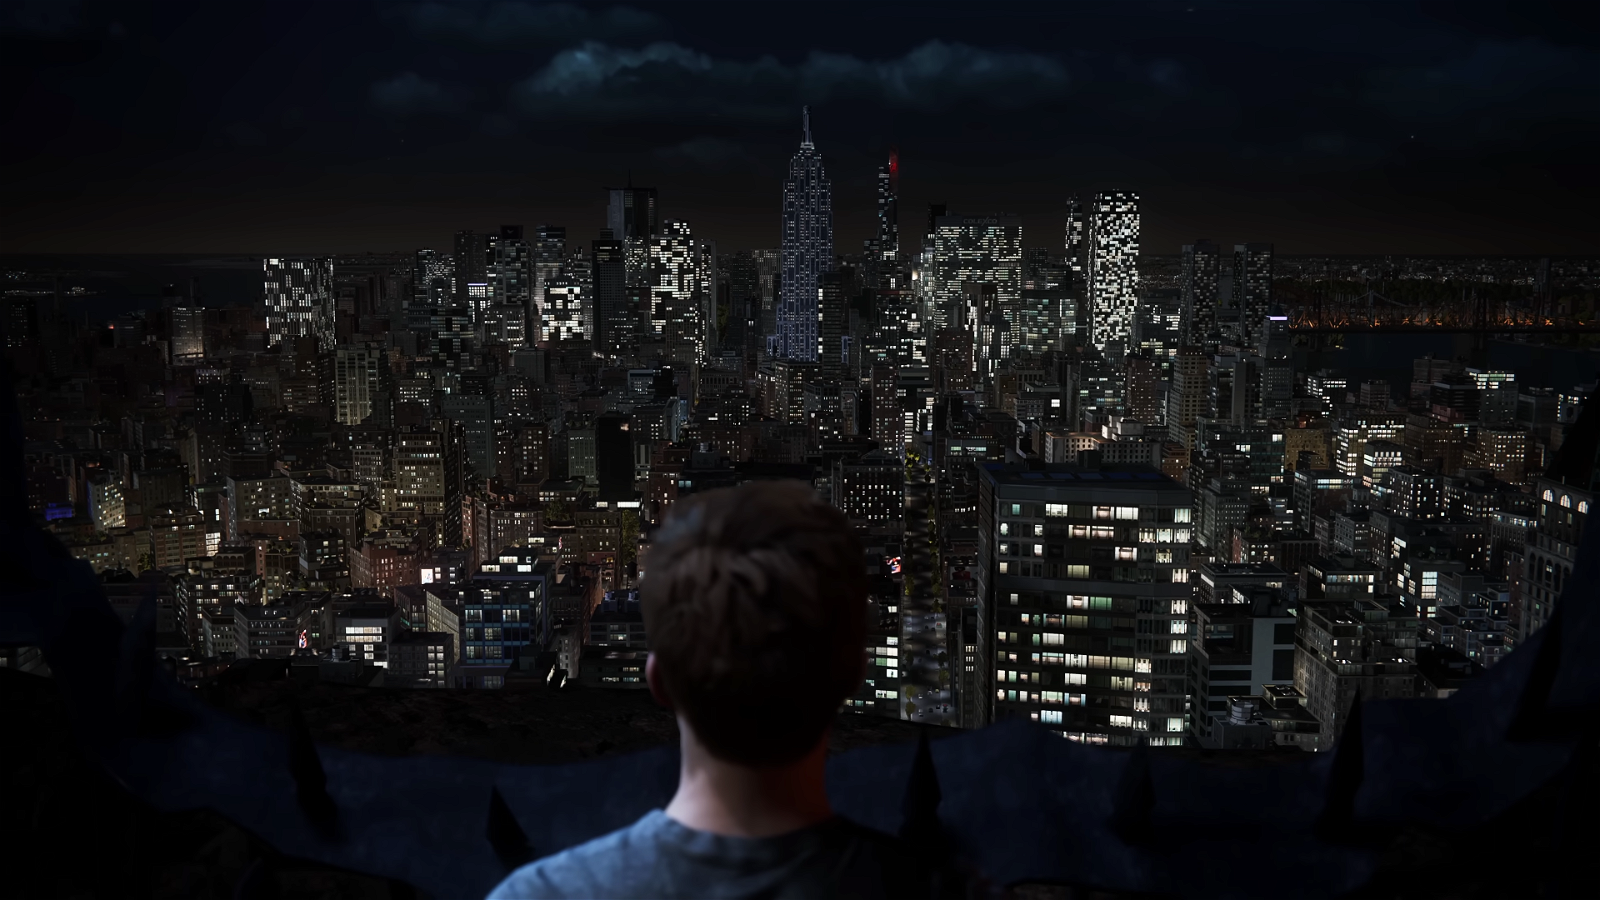 "We're going to heal the world," both Harry Osborn and Venom said in Marvel's Spider-Man 2 story trailer.